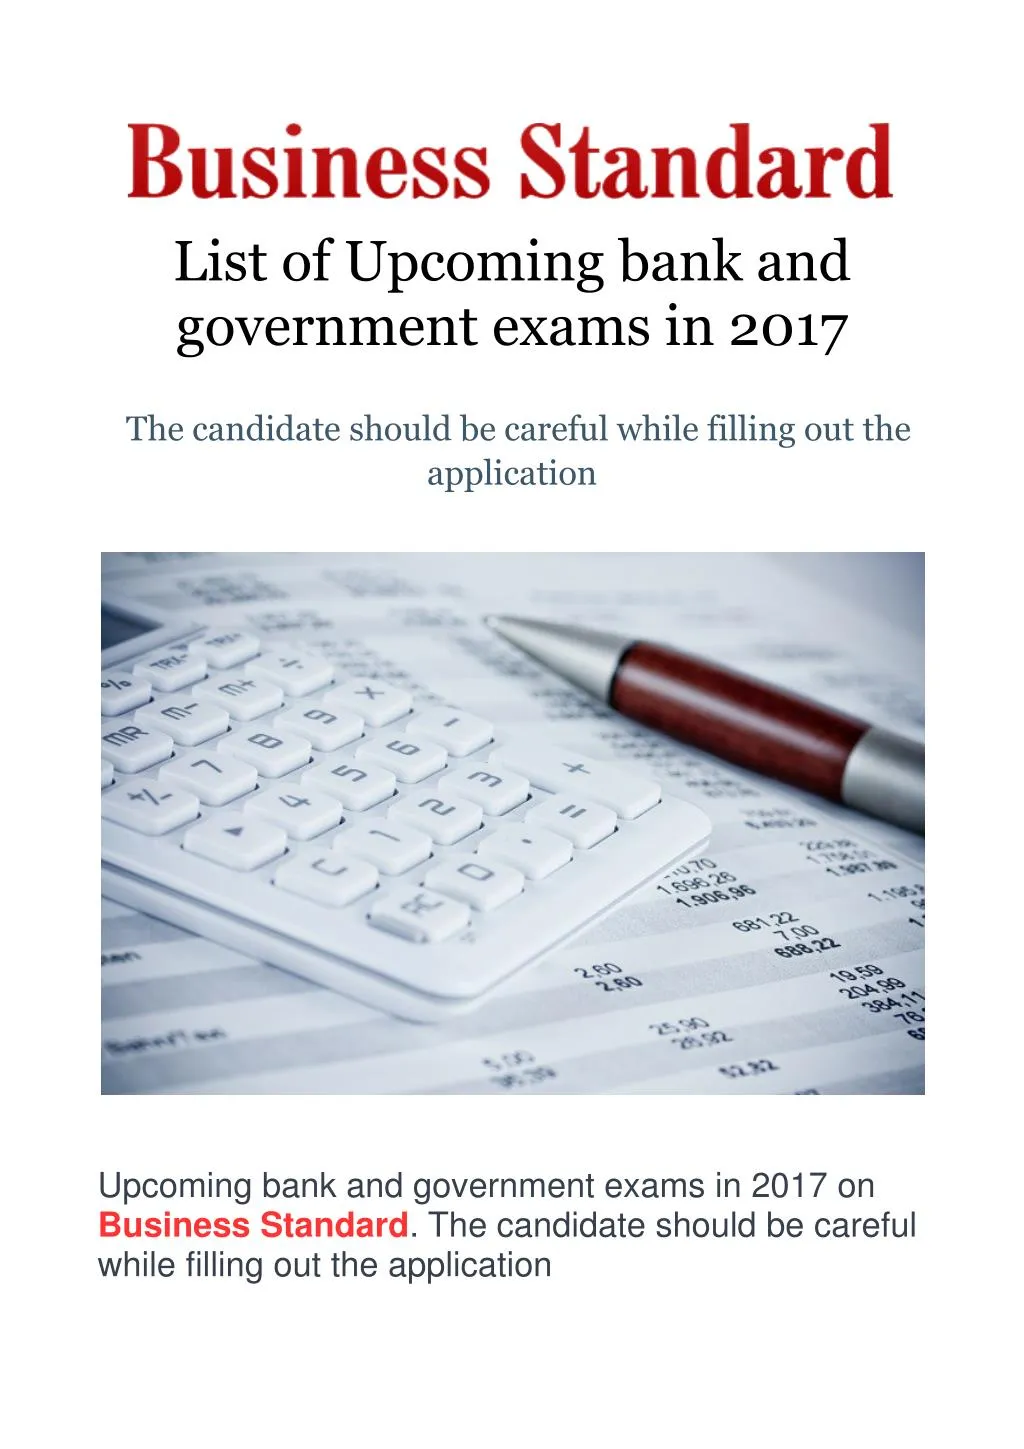 list of upcoming bank and government exams in 2017